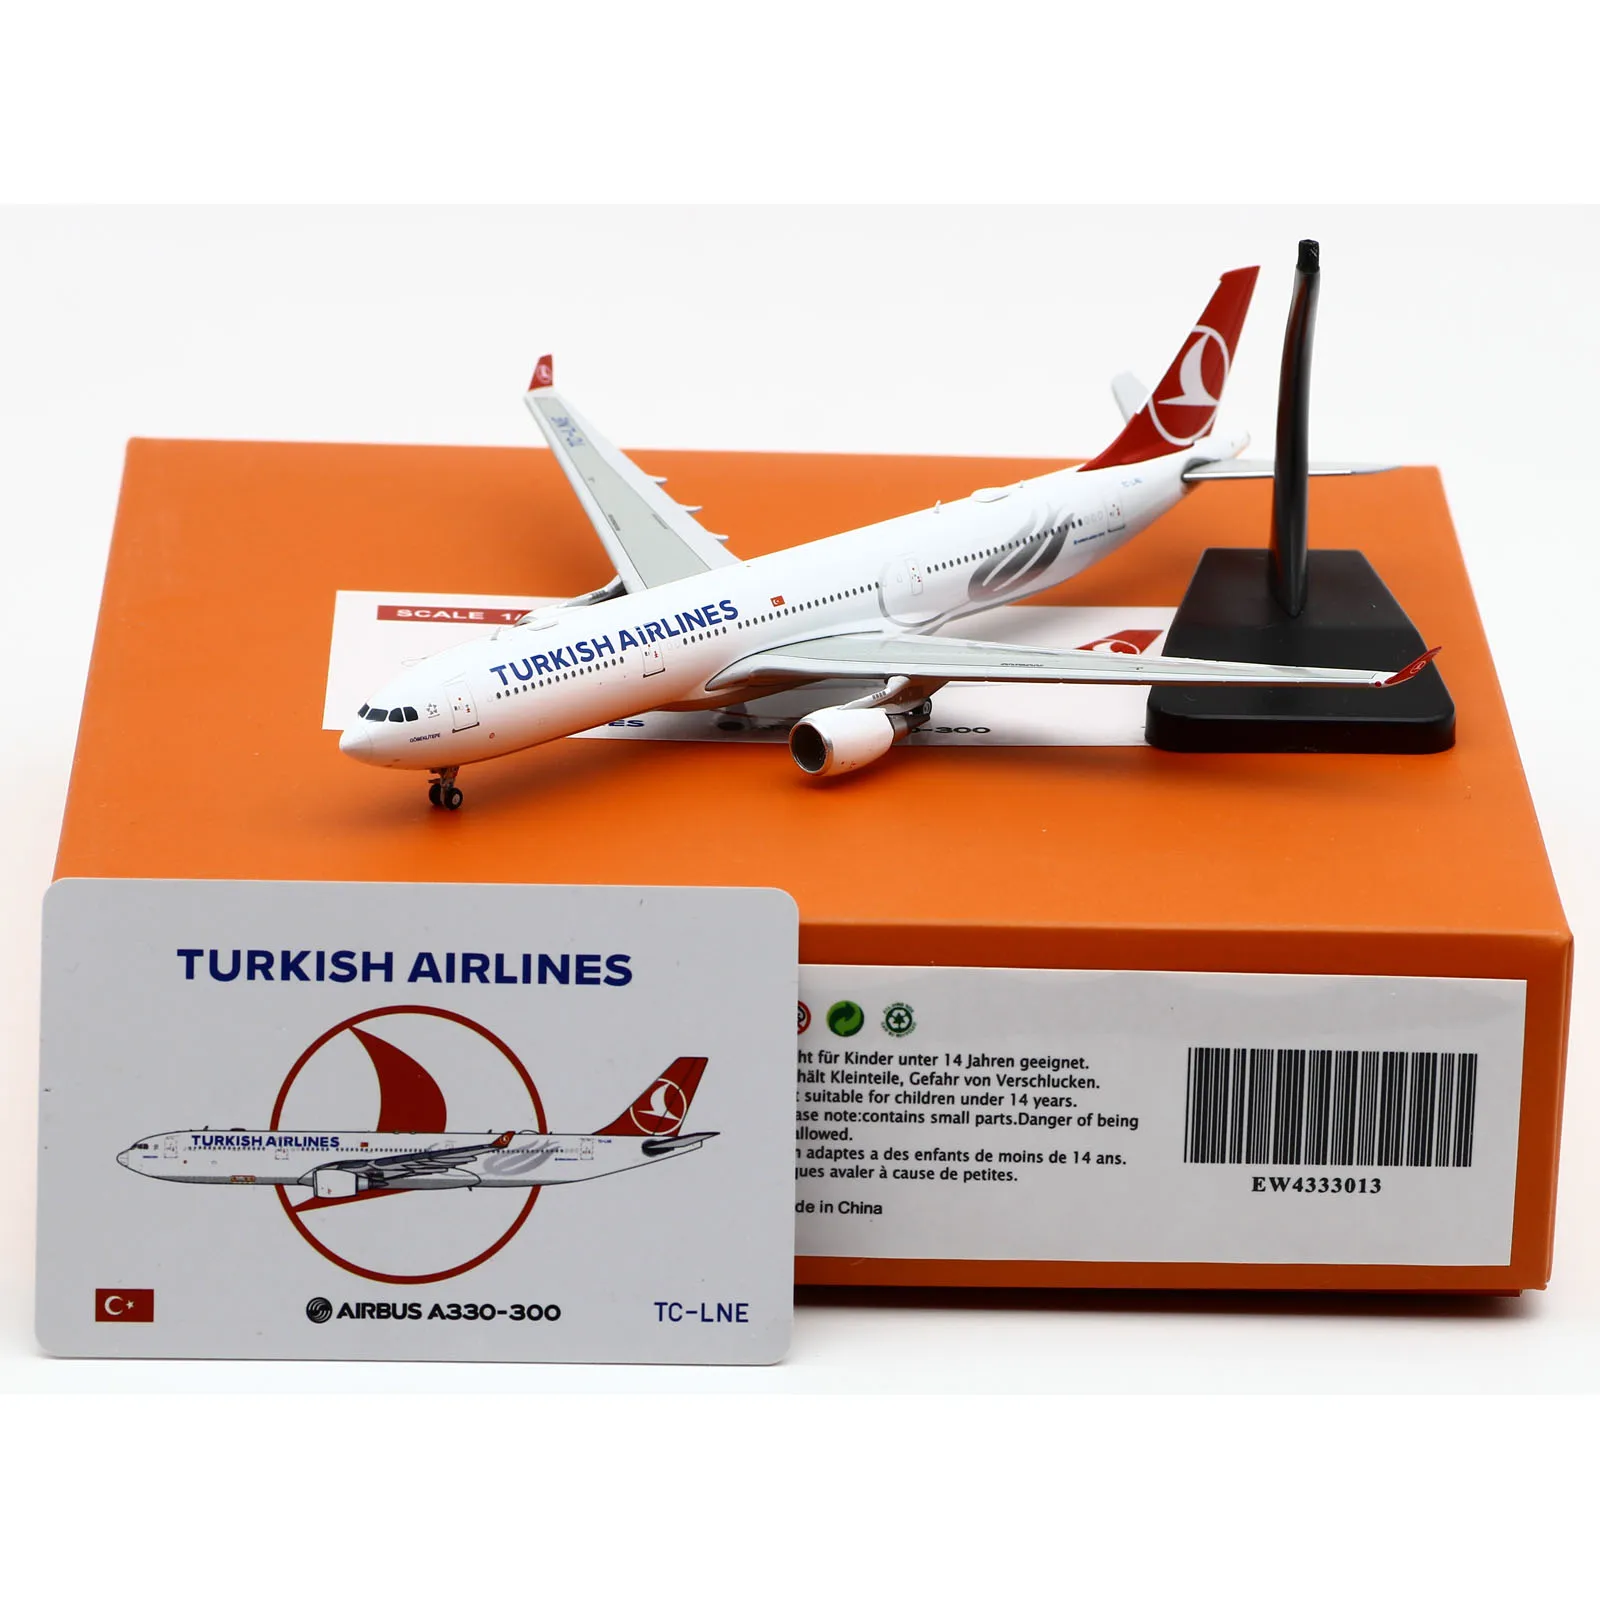 ew4333013-alloy-collectible-plane-gift-jc-wings-1-400-turkish-airlines-airbus-a330-300-diecast-aircraft-jet-model-tc-lne